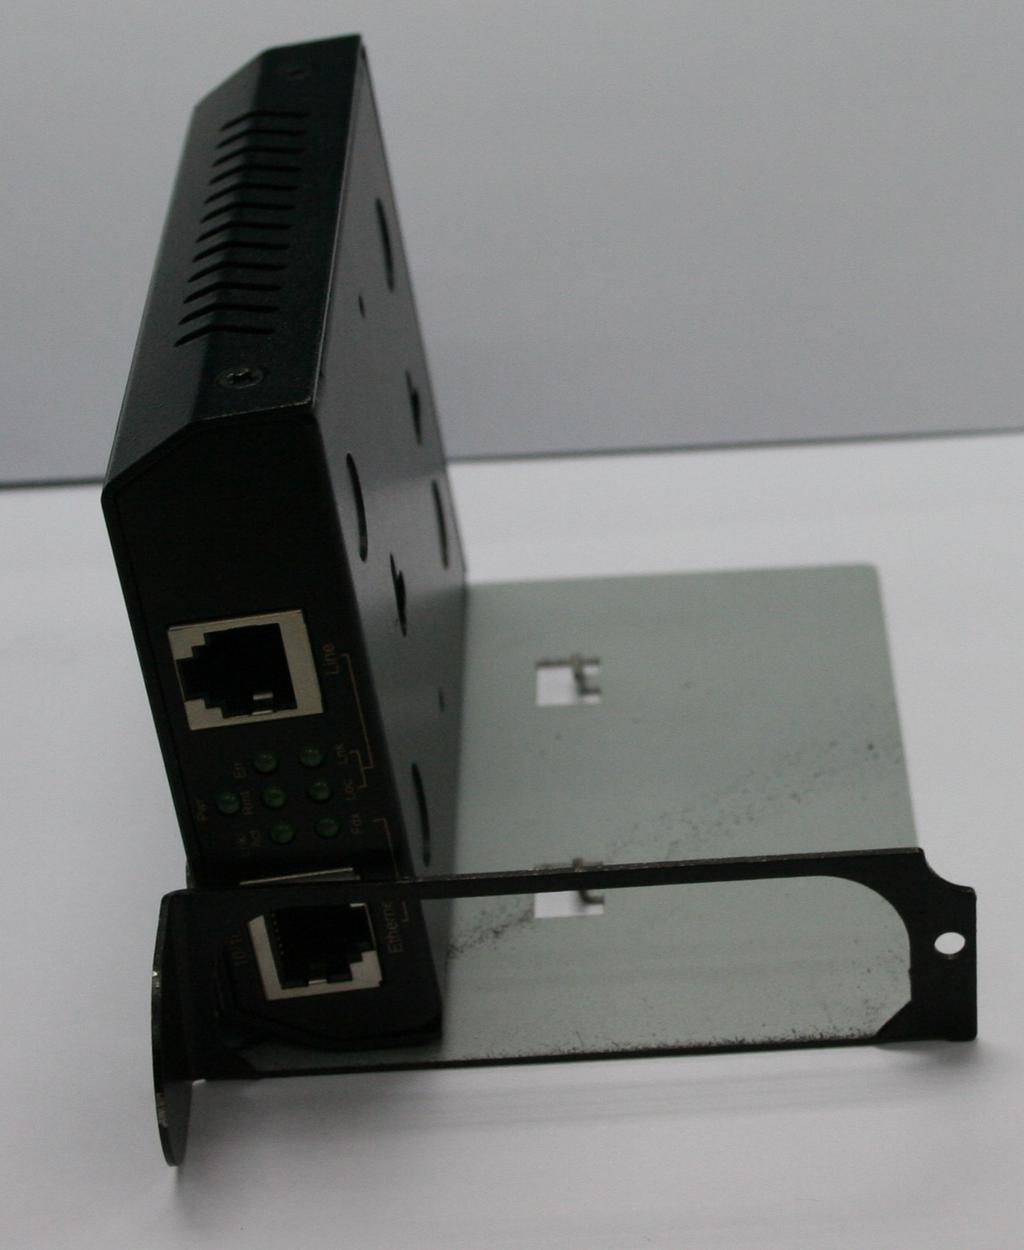 First, install the Ethernet Extender onto a carrier supplied with the chassis: